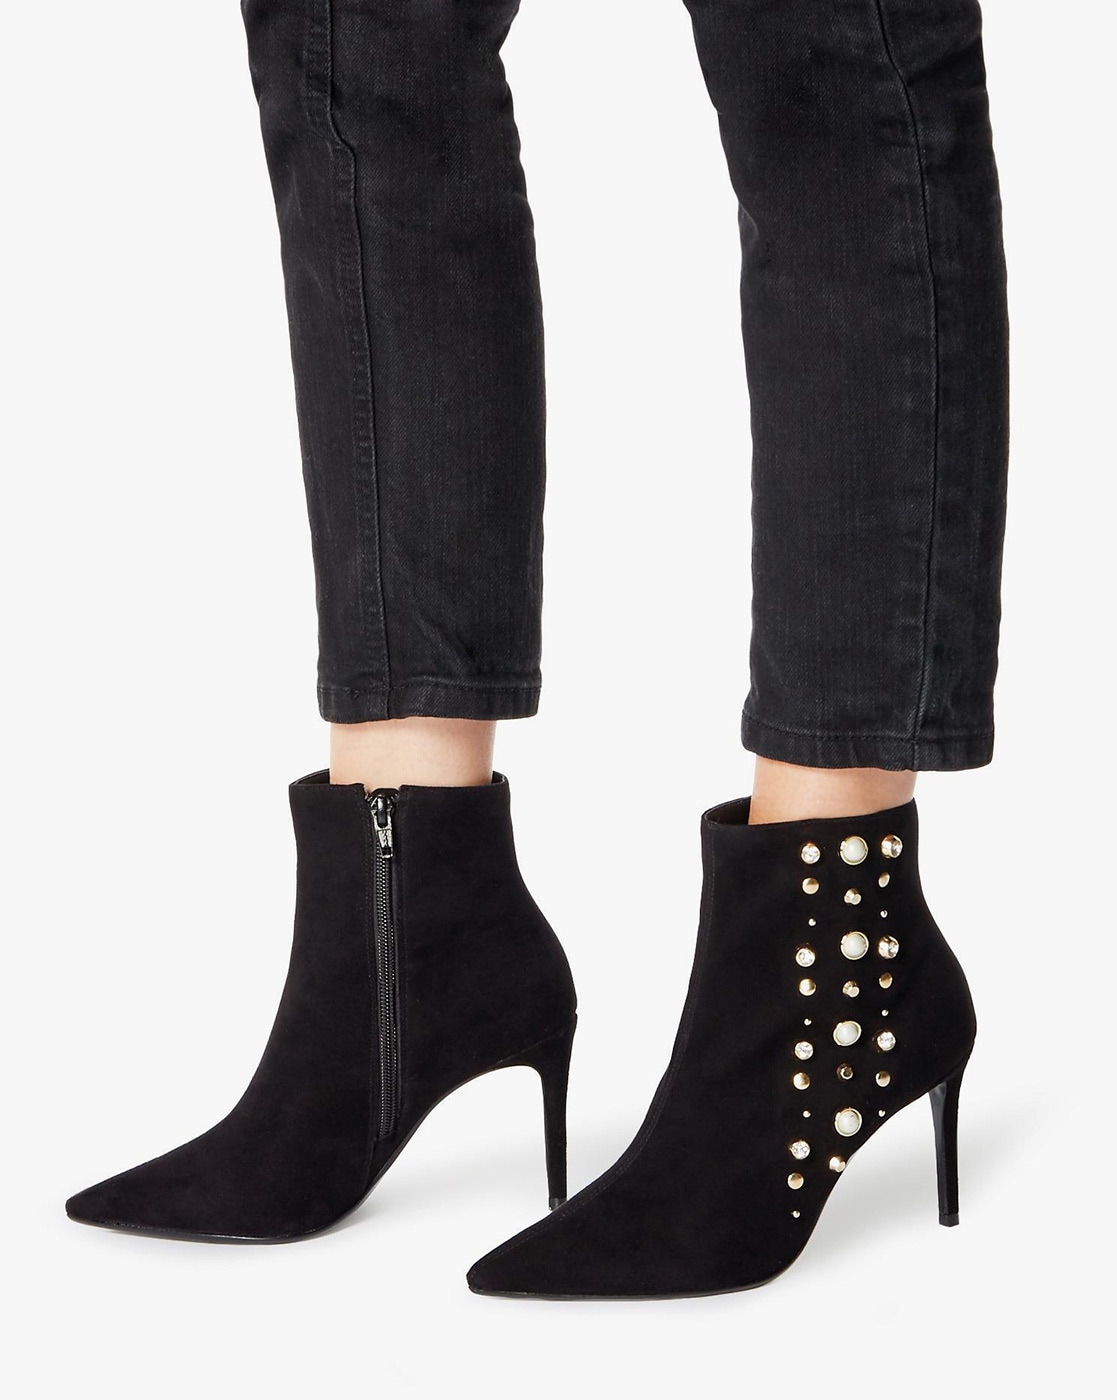 dune black leather ankle boots